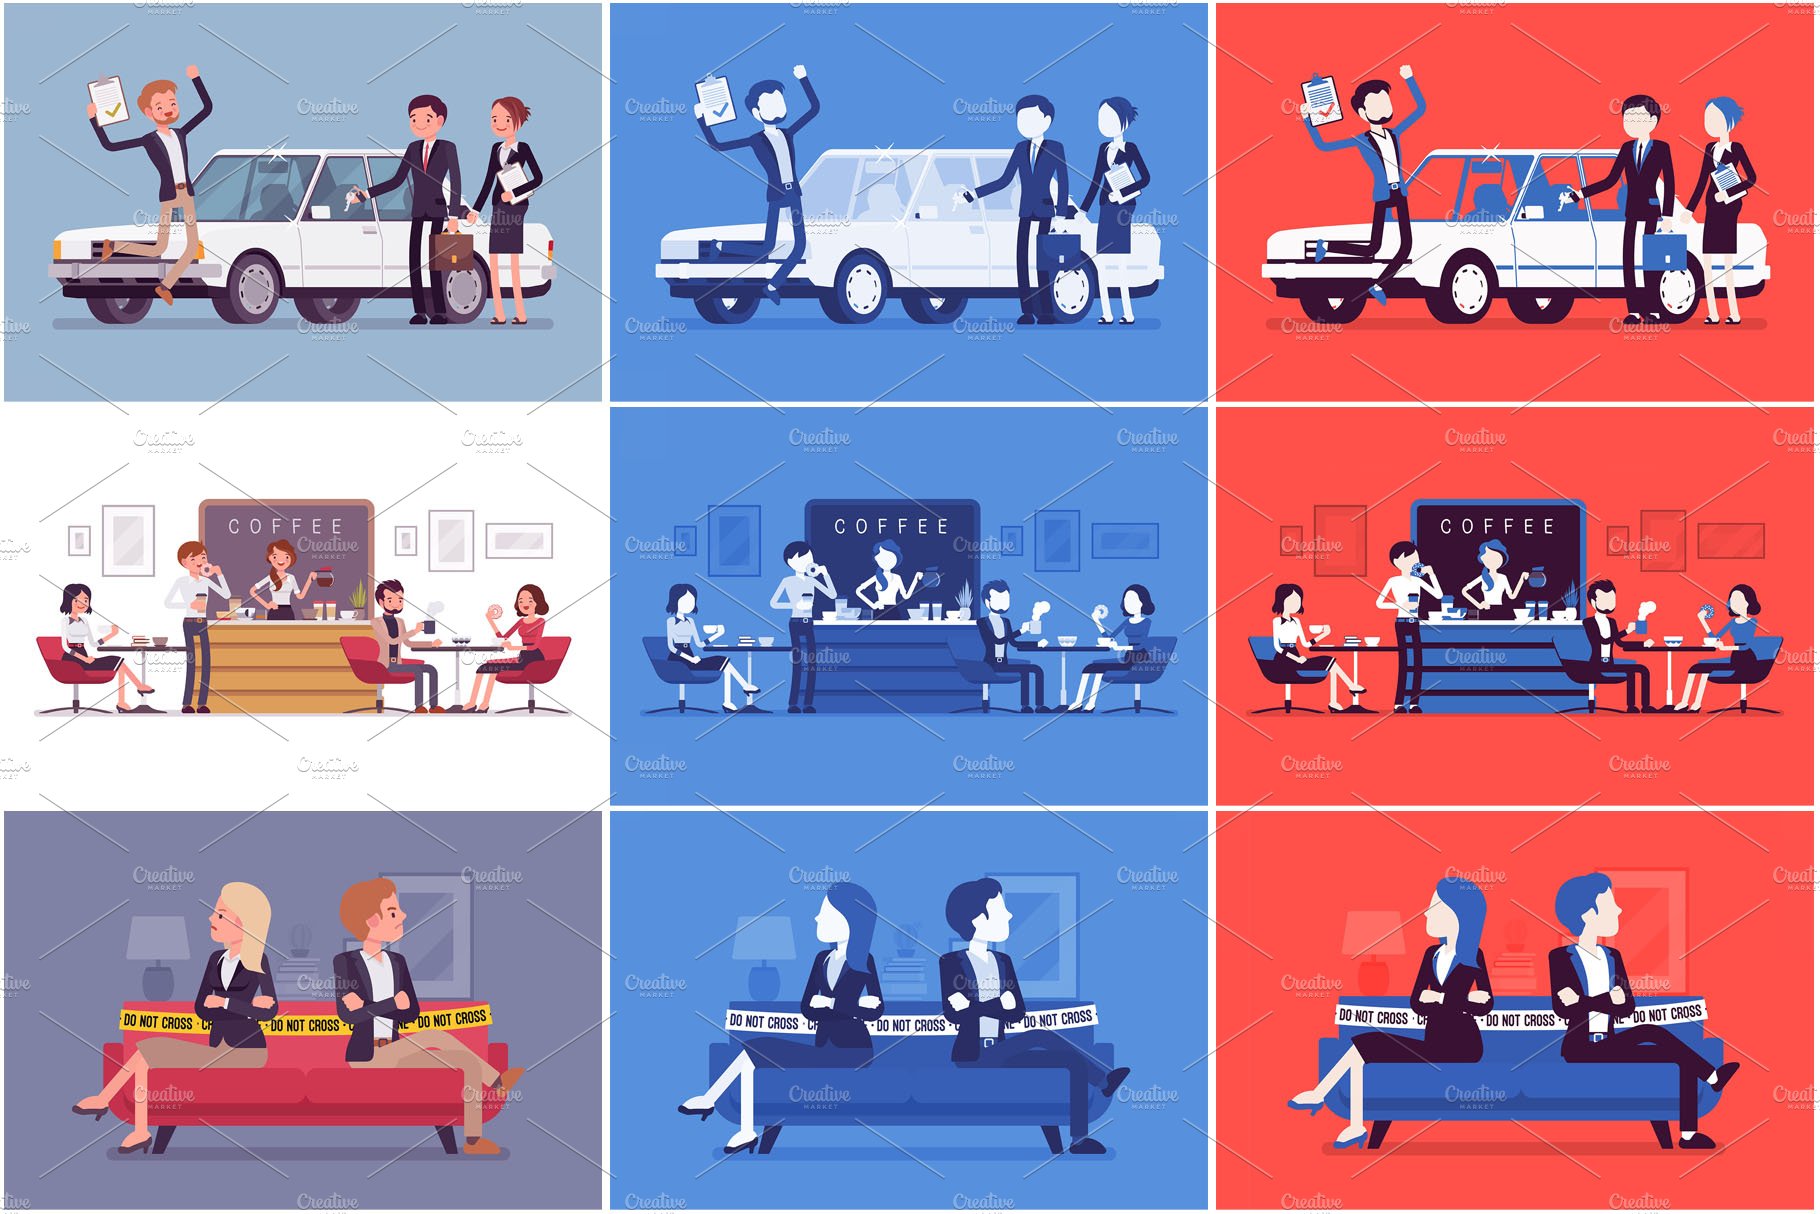 A series of illustrations of people sitting at a table.